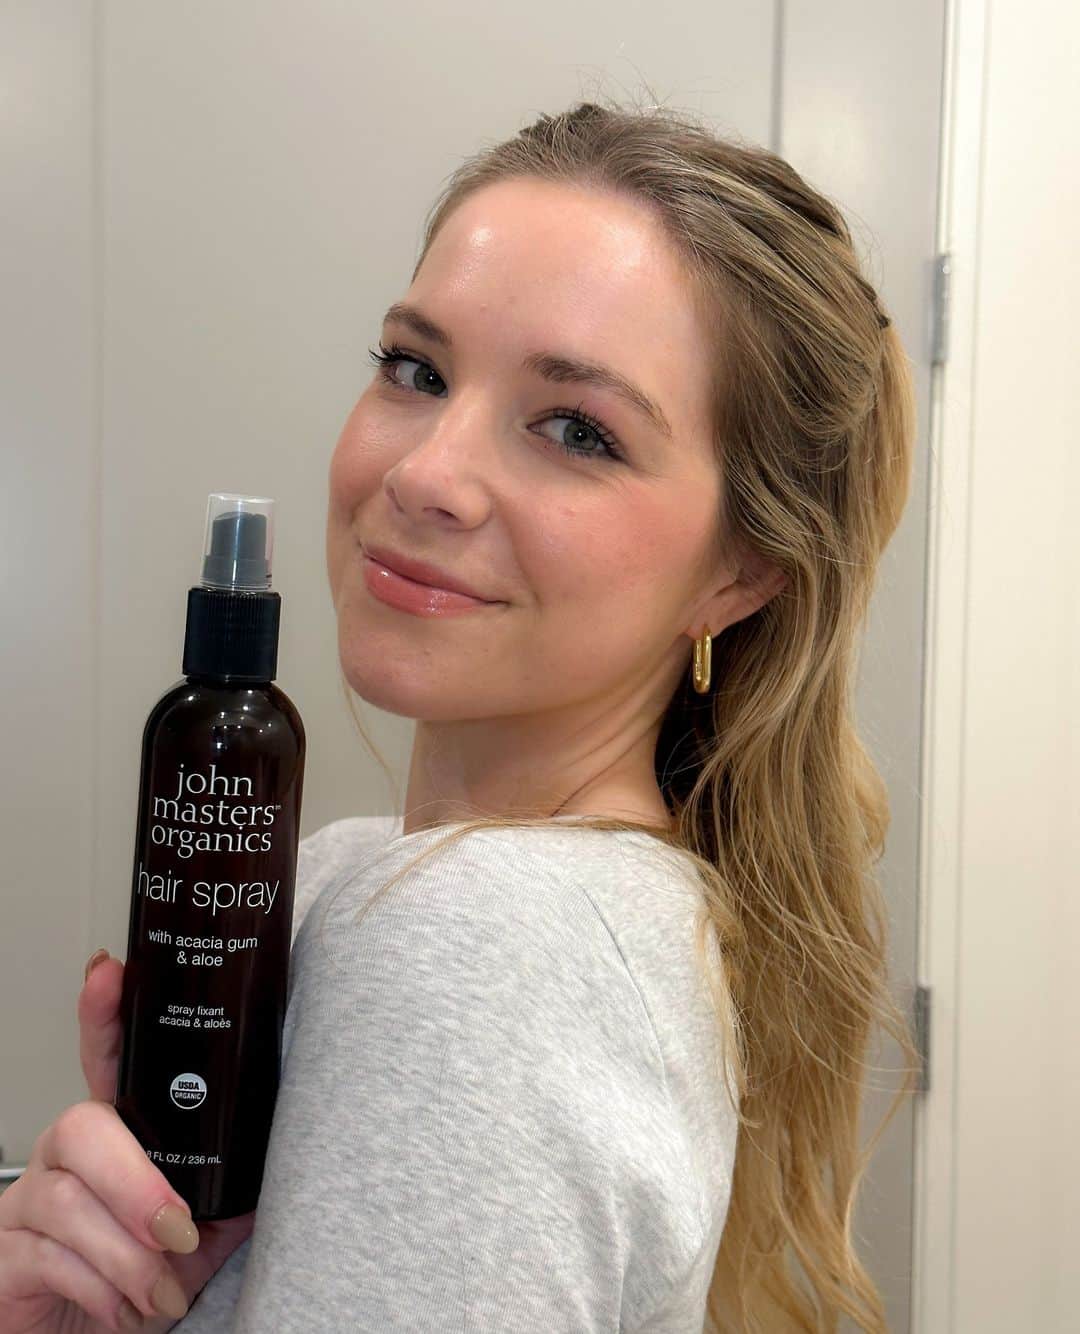 John Masters Organicsのインスタグラム：「Look good, feel better using our non-aerosol, USDA-Organic Hair Spray with Acacia Gum and Aloe ✨⁠ ⁠ Featuring @emmalorrae and her gorgeous curled half-up hairstyle 🤎⁠ ⁠ Grab your new non-toxic essential using the link in our bio. 🌿」